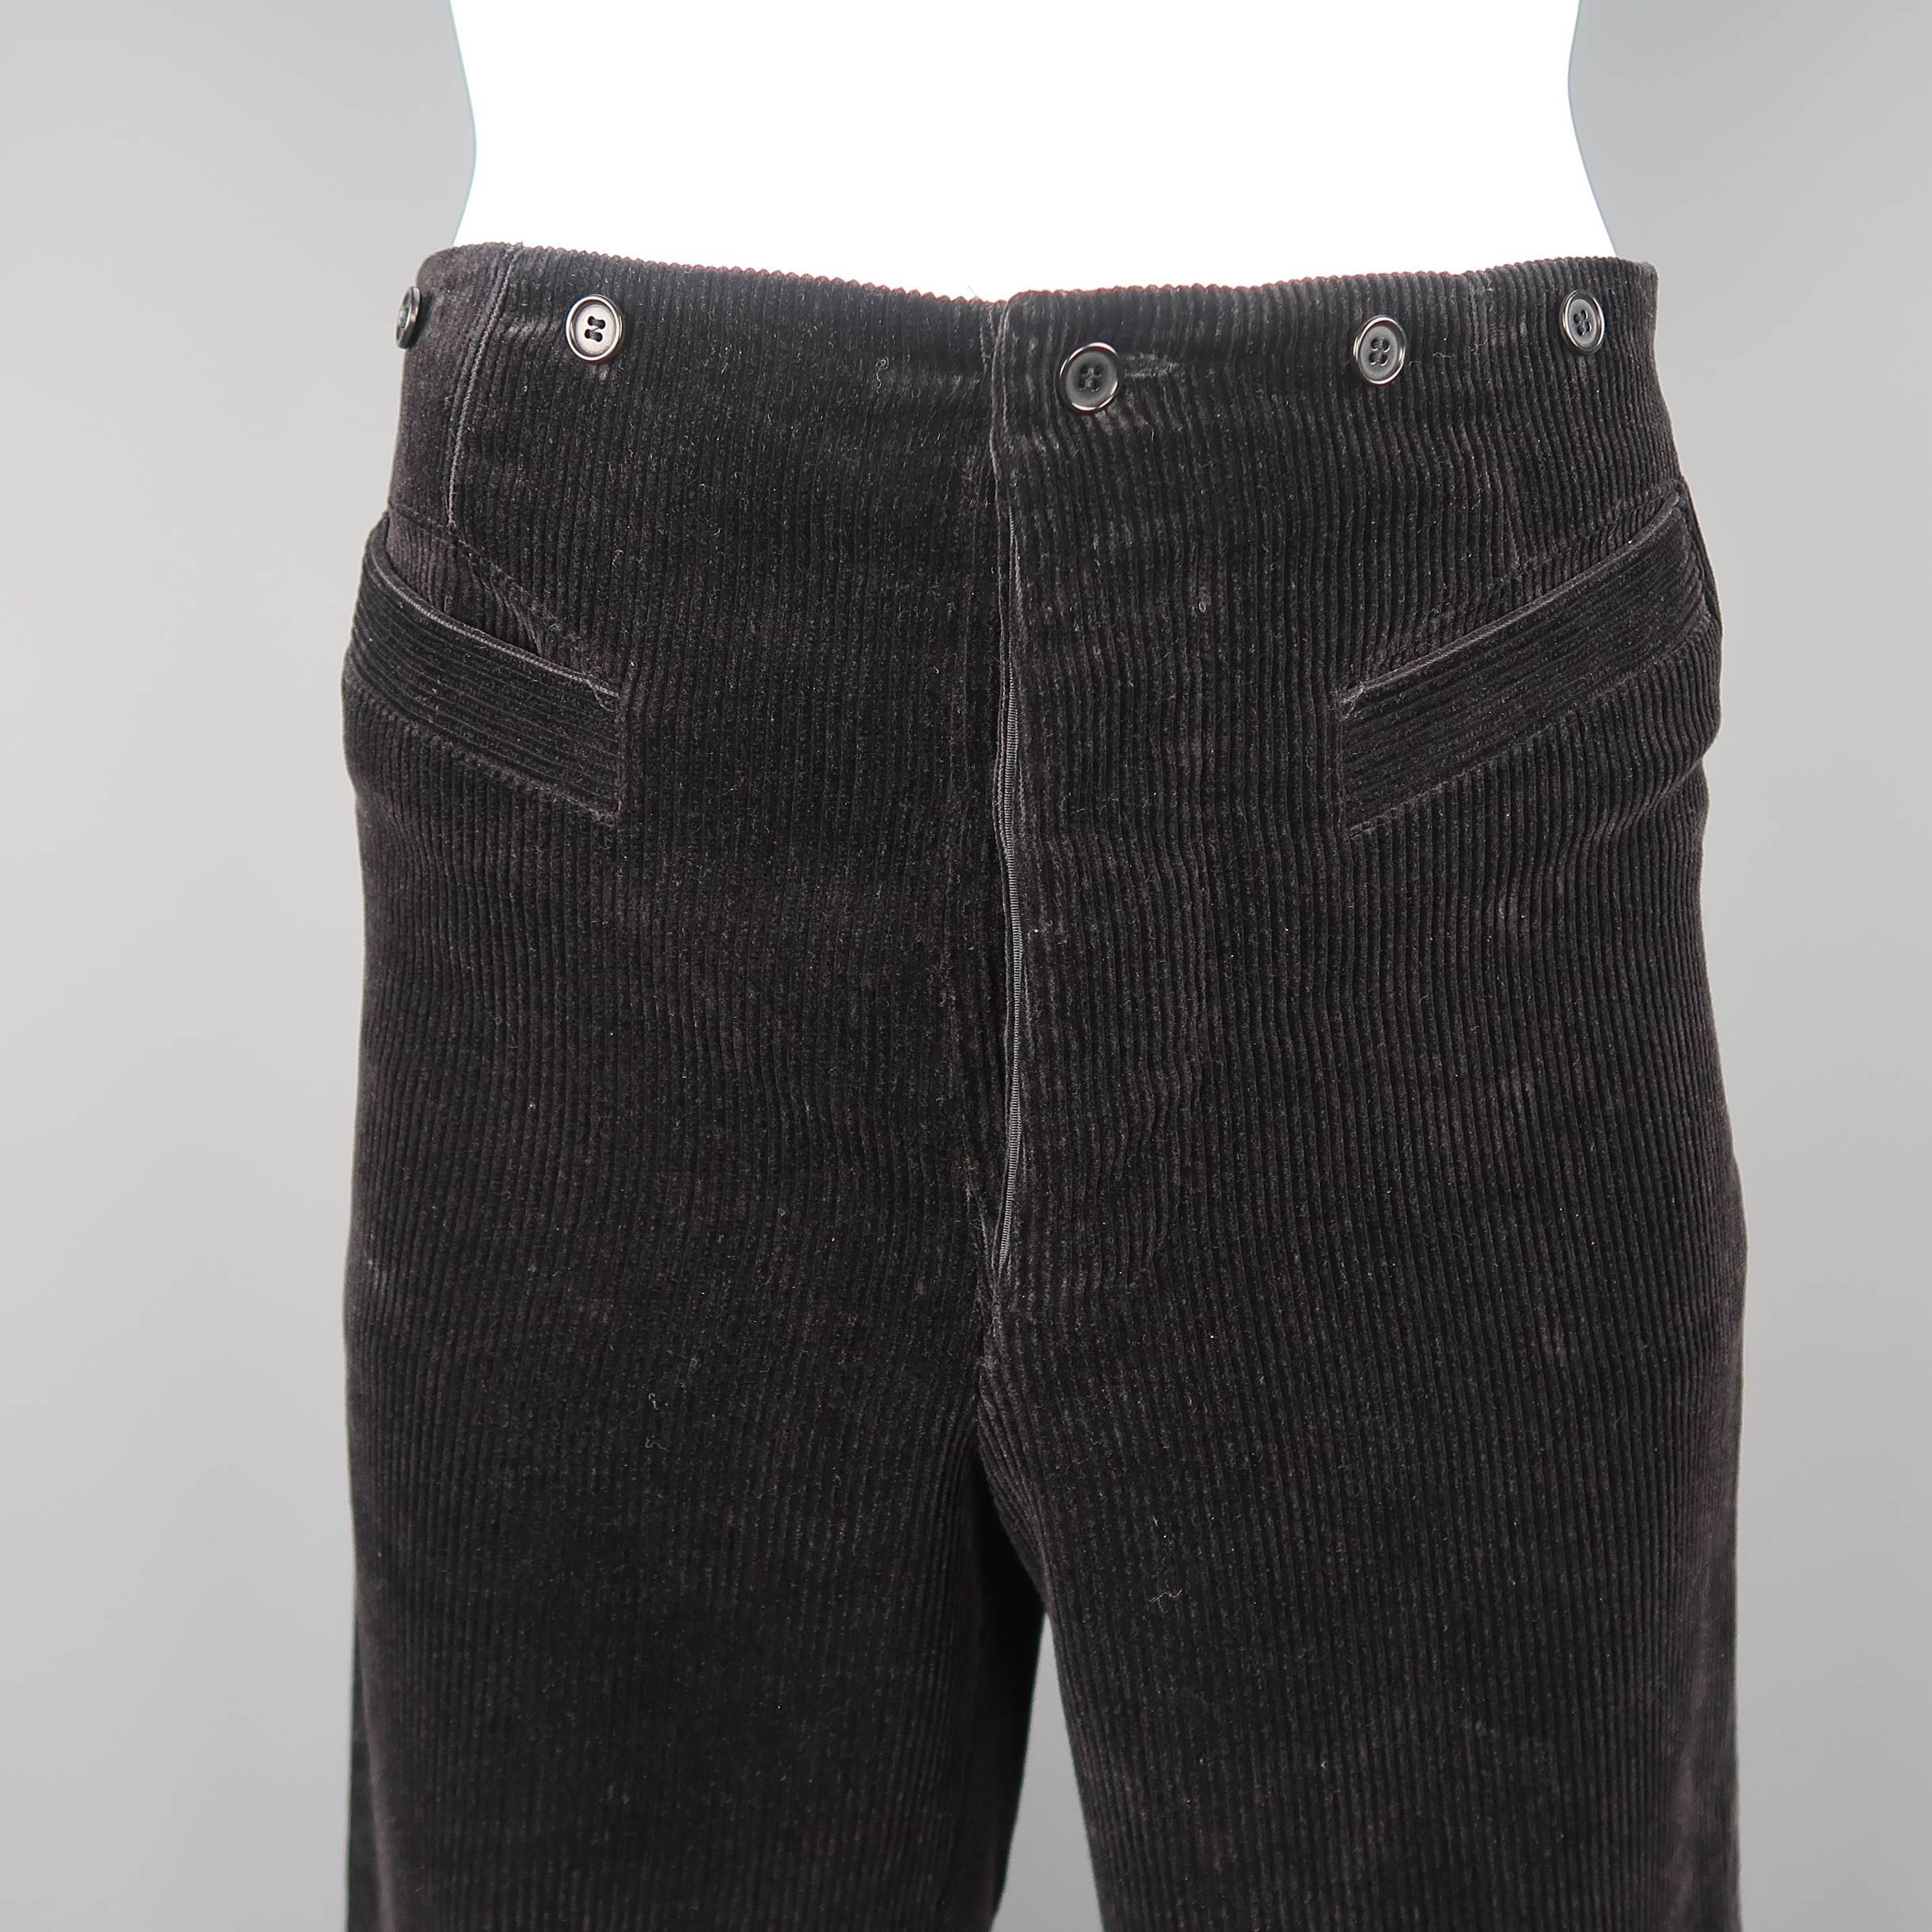 Vintage JEAN PAUL GAULTIER dress pants come in black corduroy with a high rise, braces buttons, relaxed leg and gold tone bull head button cuffs. Minor wear on buttons. As-is. Made in Italy.
 
Good Pre-Owned Condition.
Marked: IT 50
 
Measurements:
